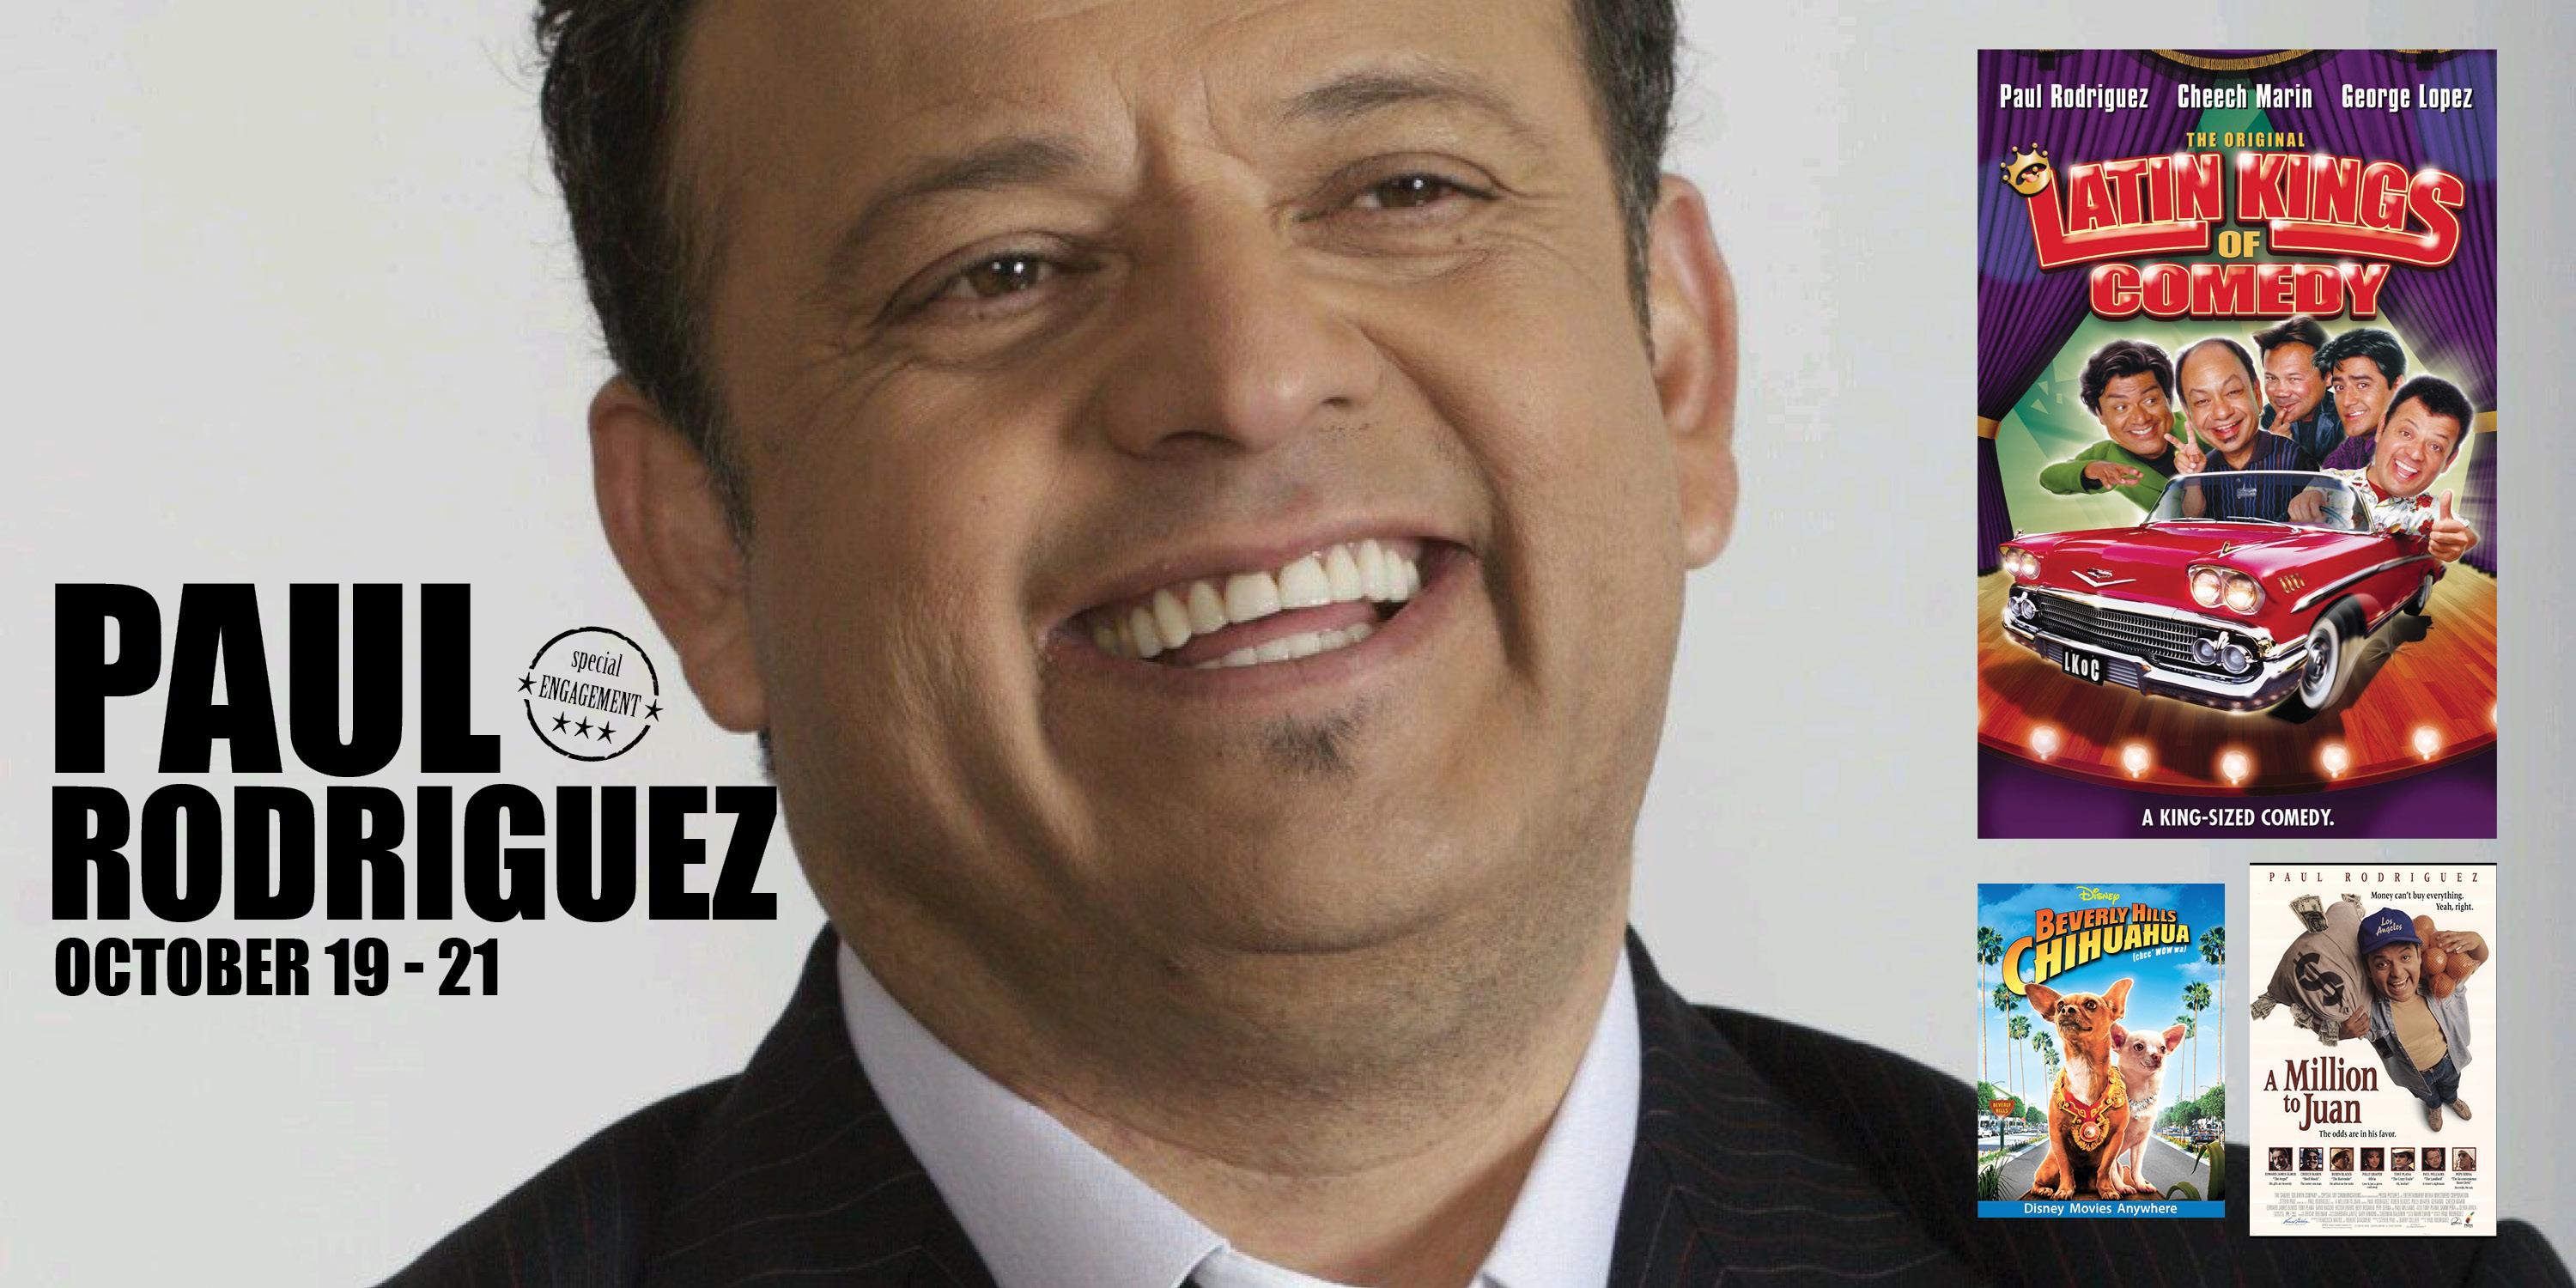  Stand up Comedian Paul Rodriguez Live in Naples, Florida